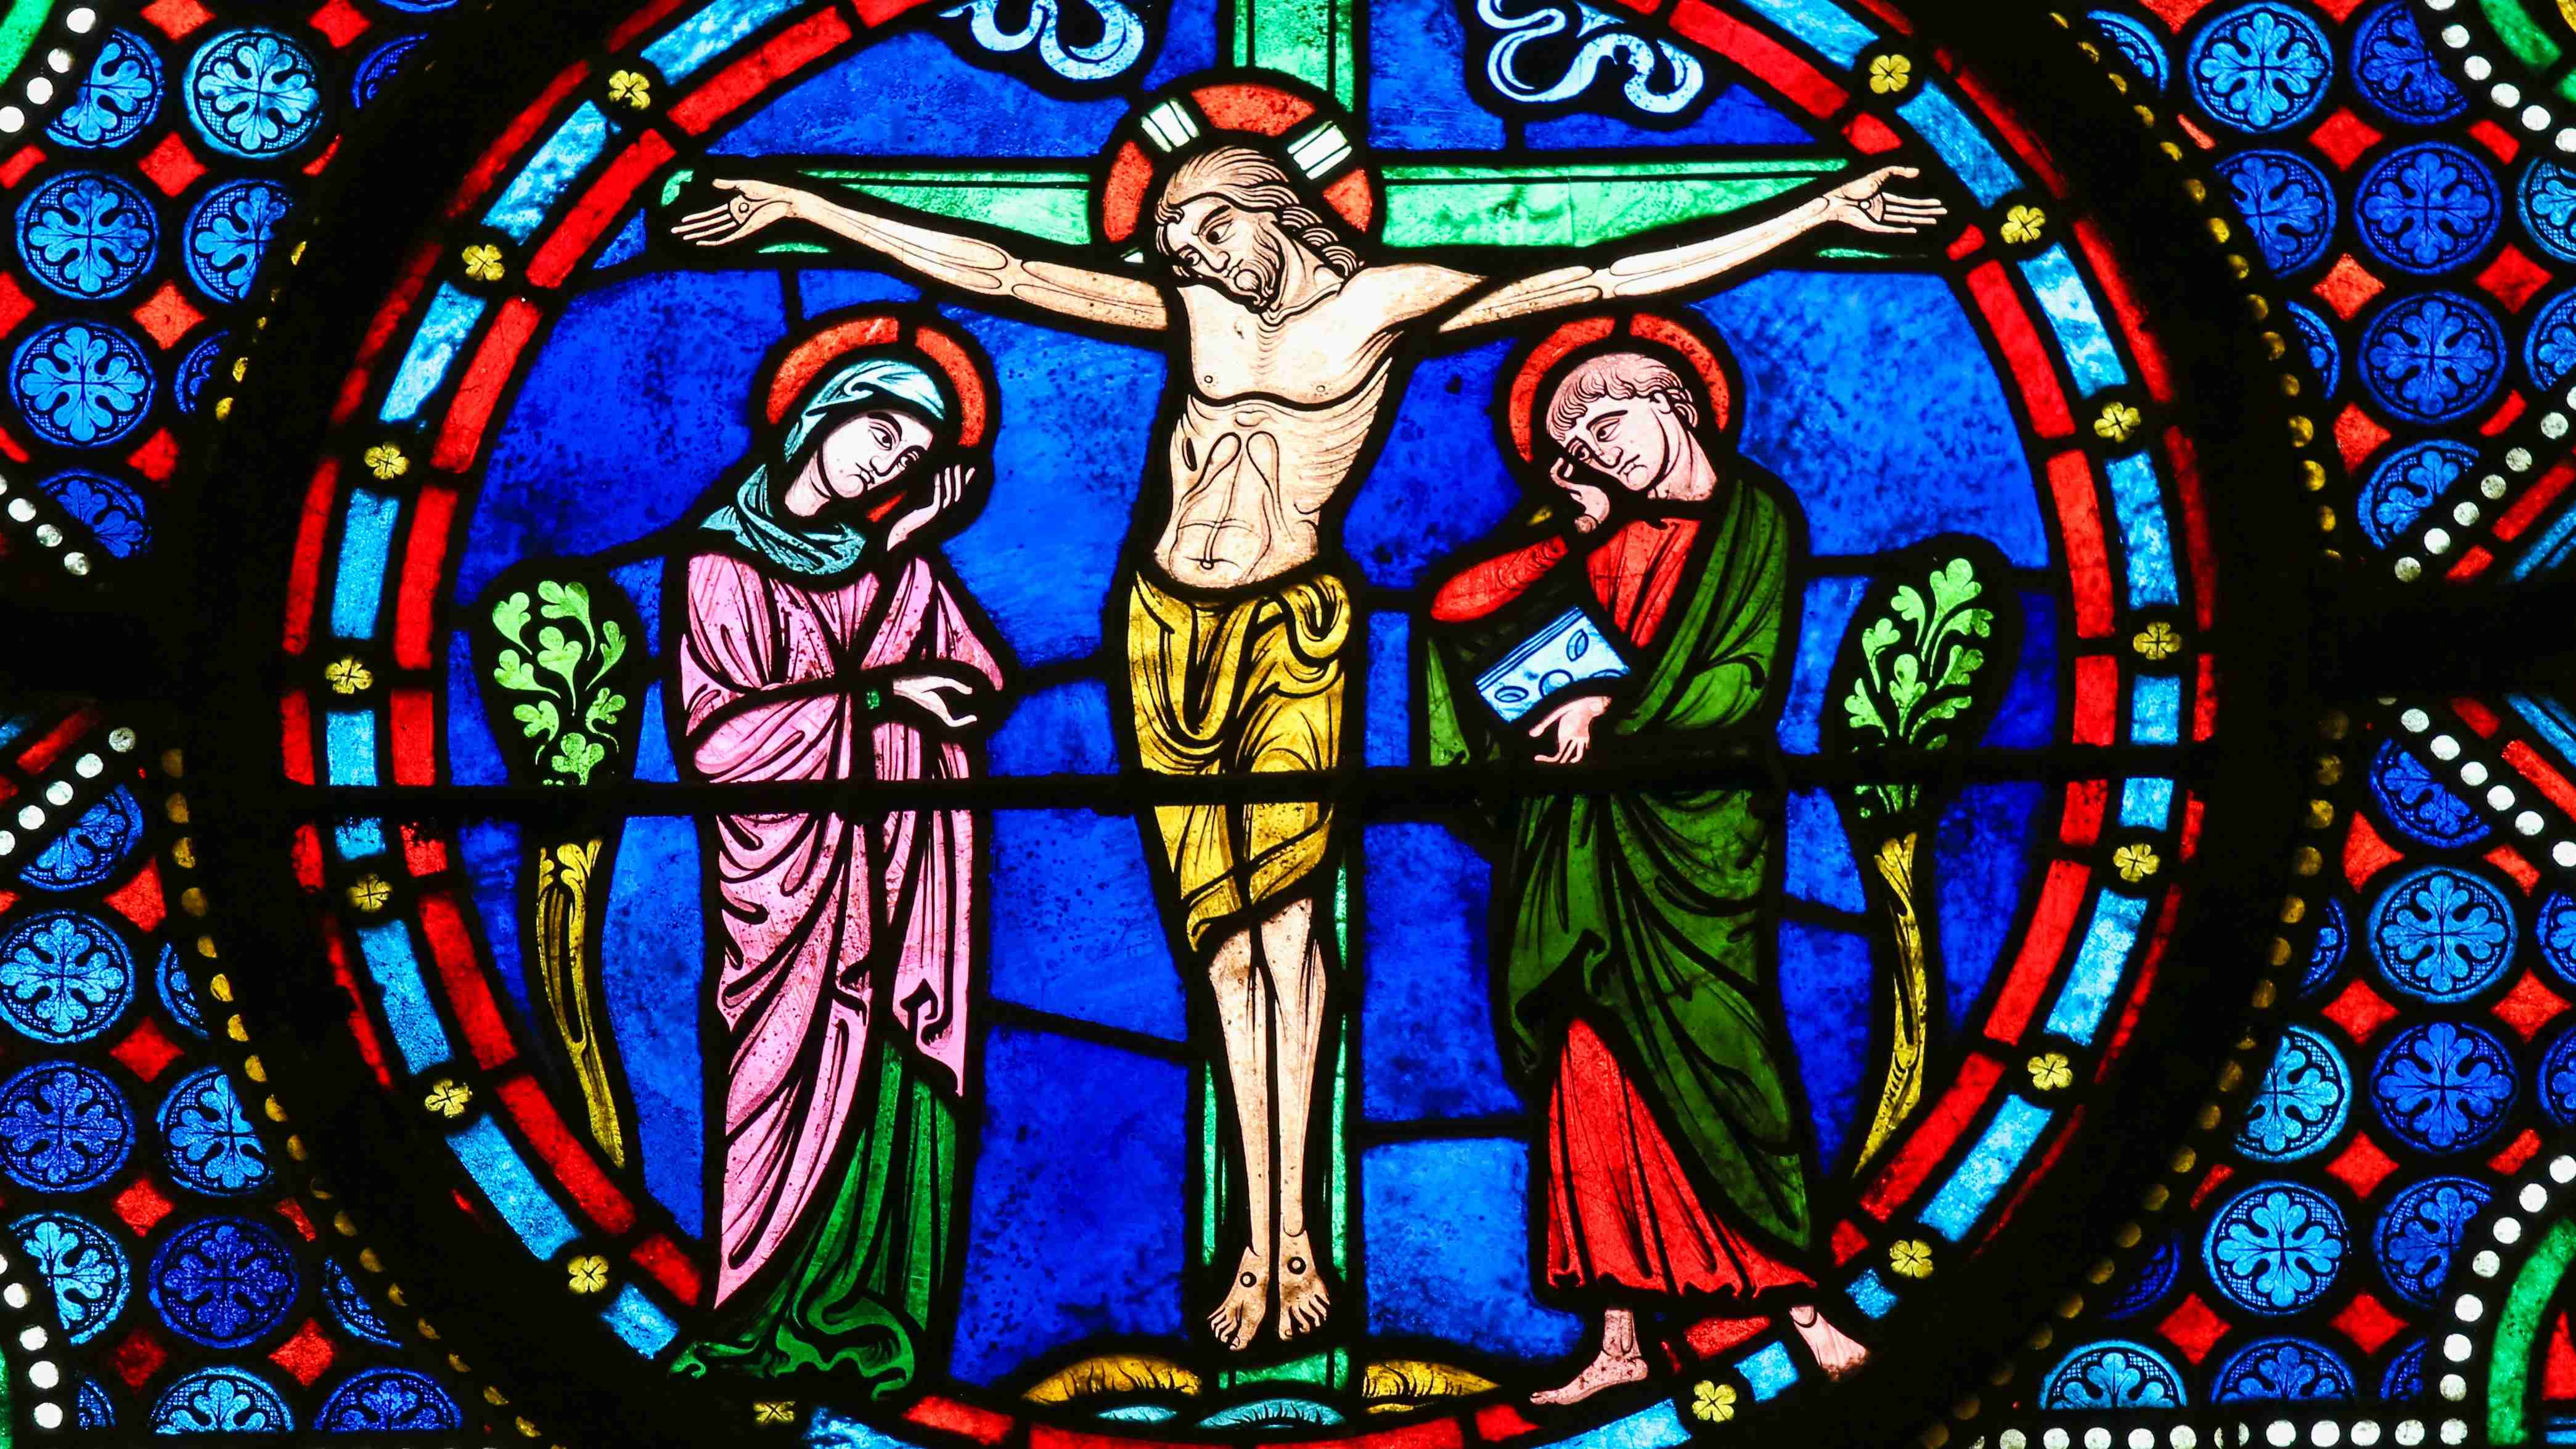 Christ on a cross stained glass window